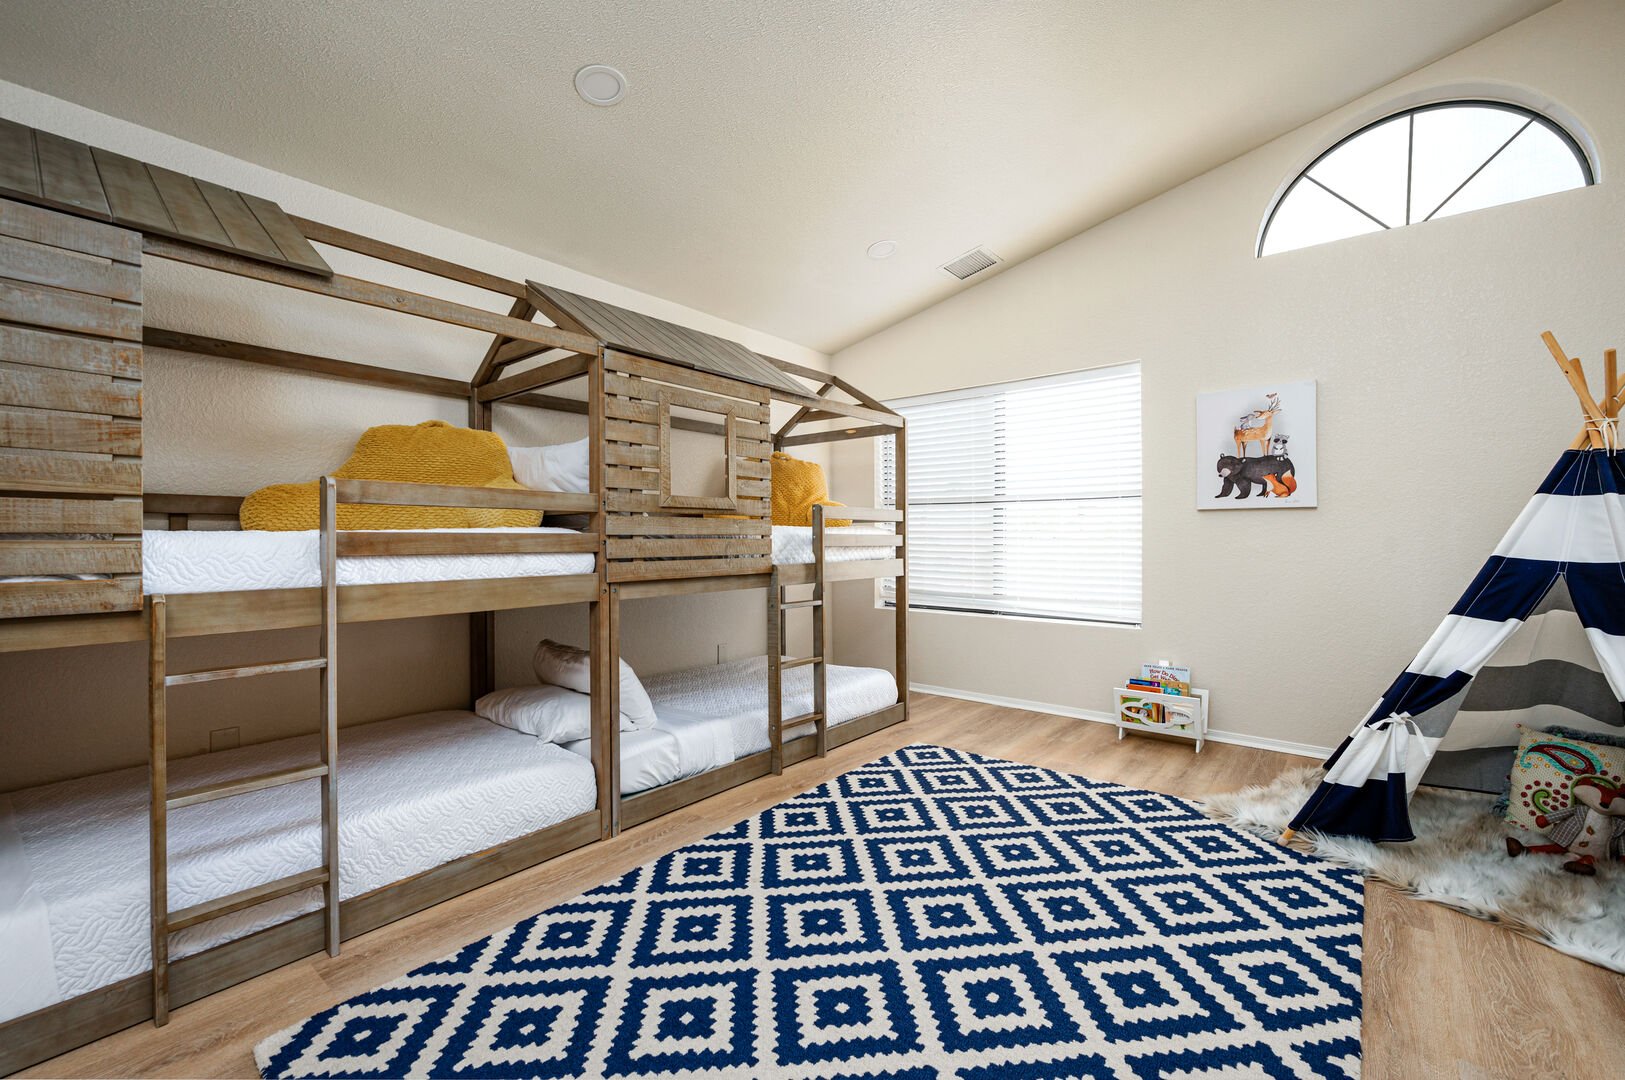 Double bunks for the kiddos!